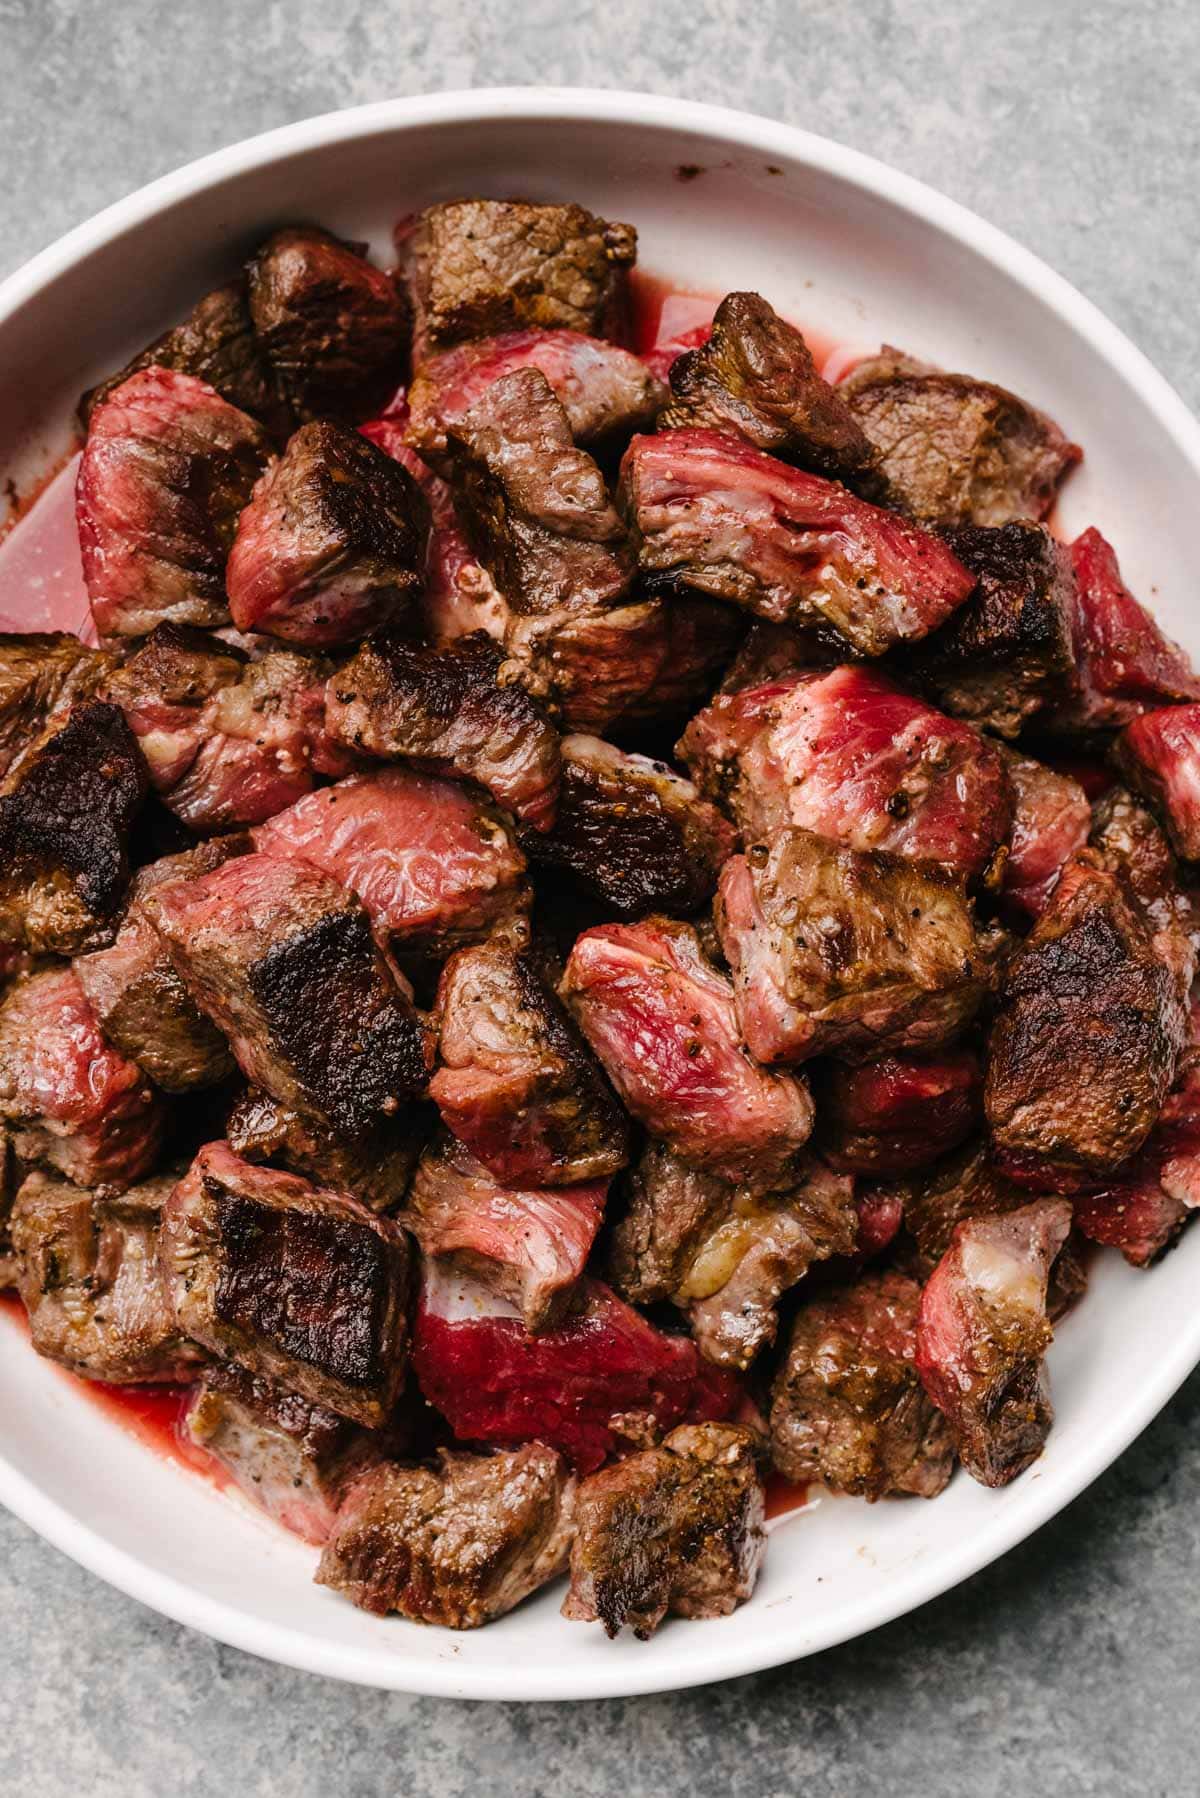 Seared pieces of stew meat on a white plate.